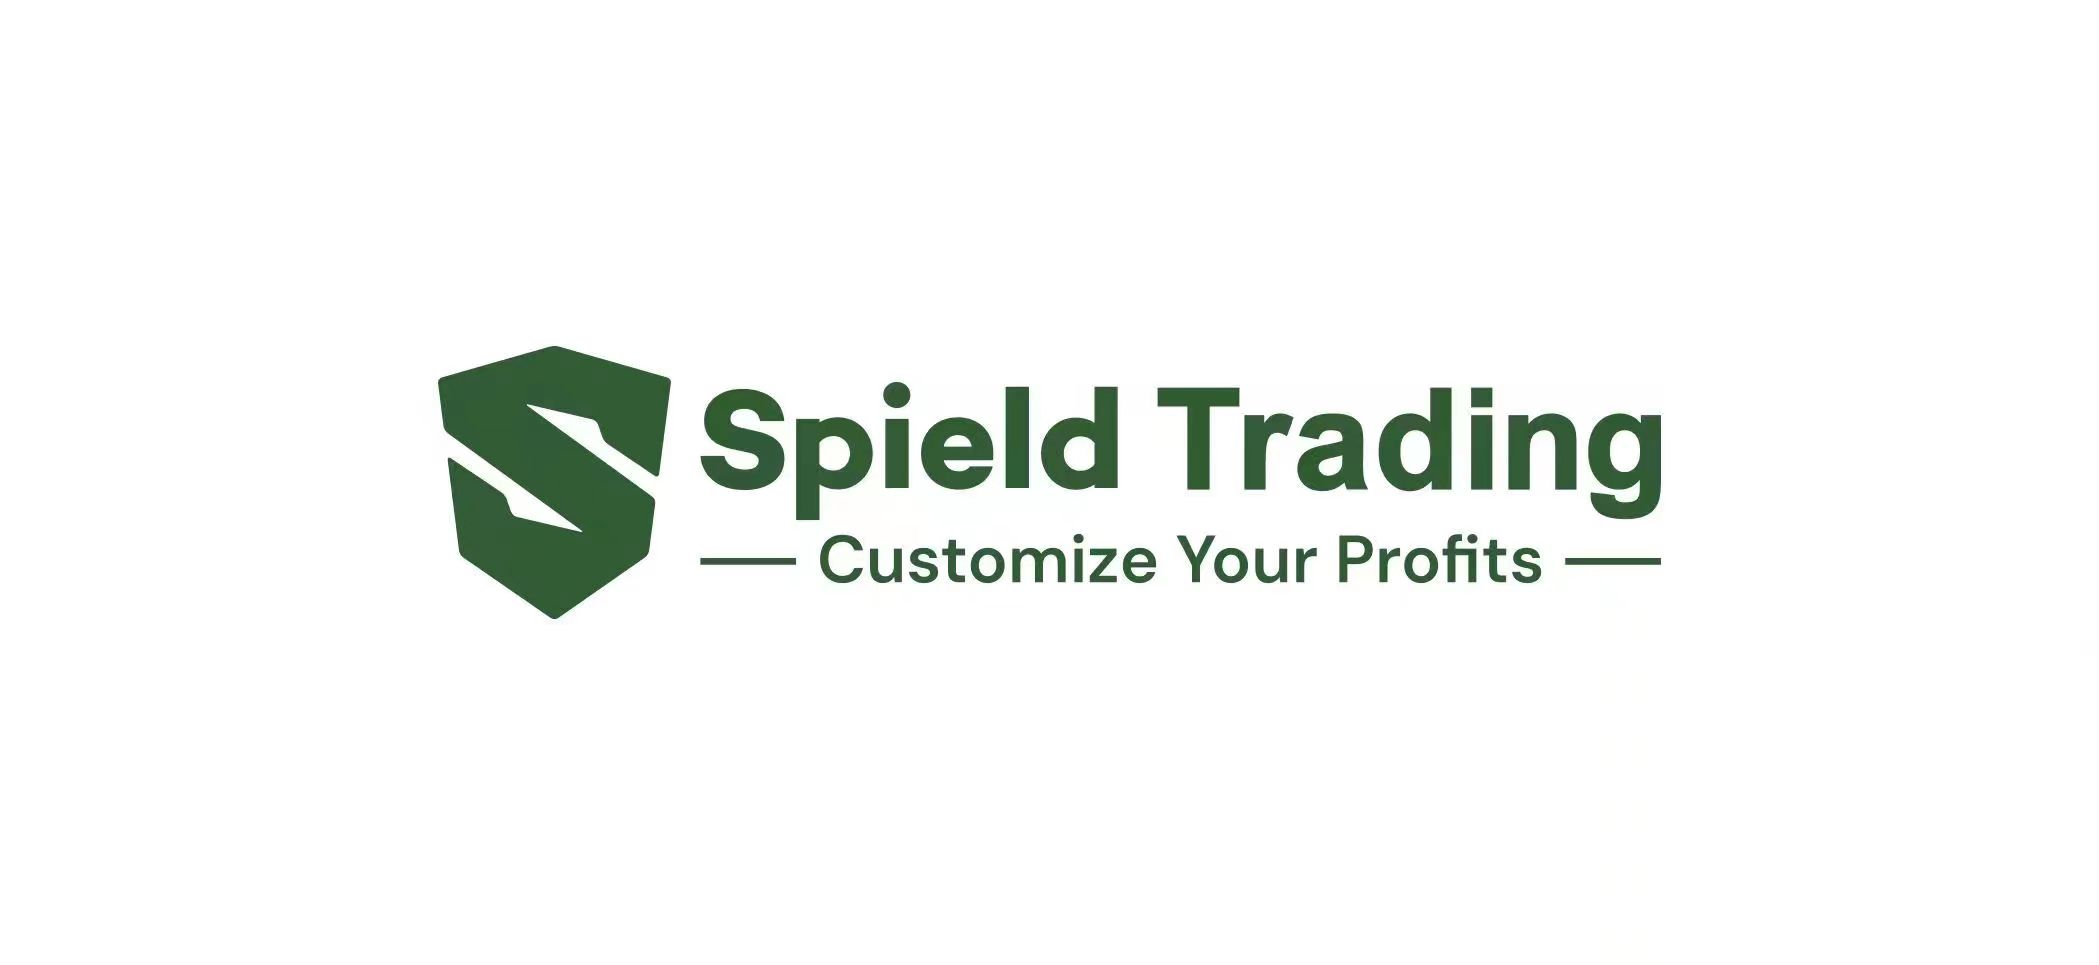 Spield Trading Generates Over $1.8 Billion Net Profit for Partners in 2023, Sharing the Right Values in the Crypto Industry